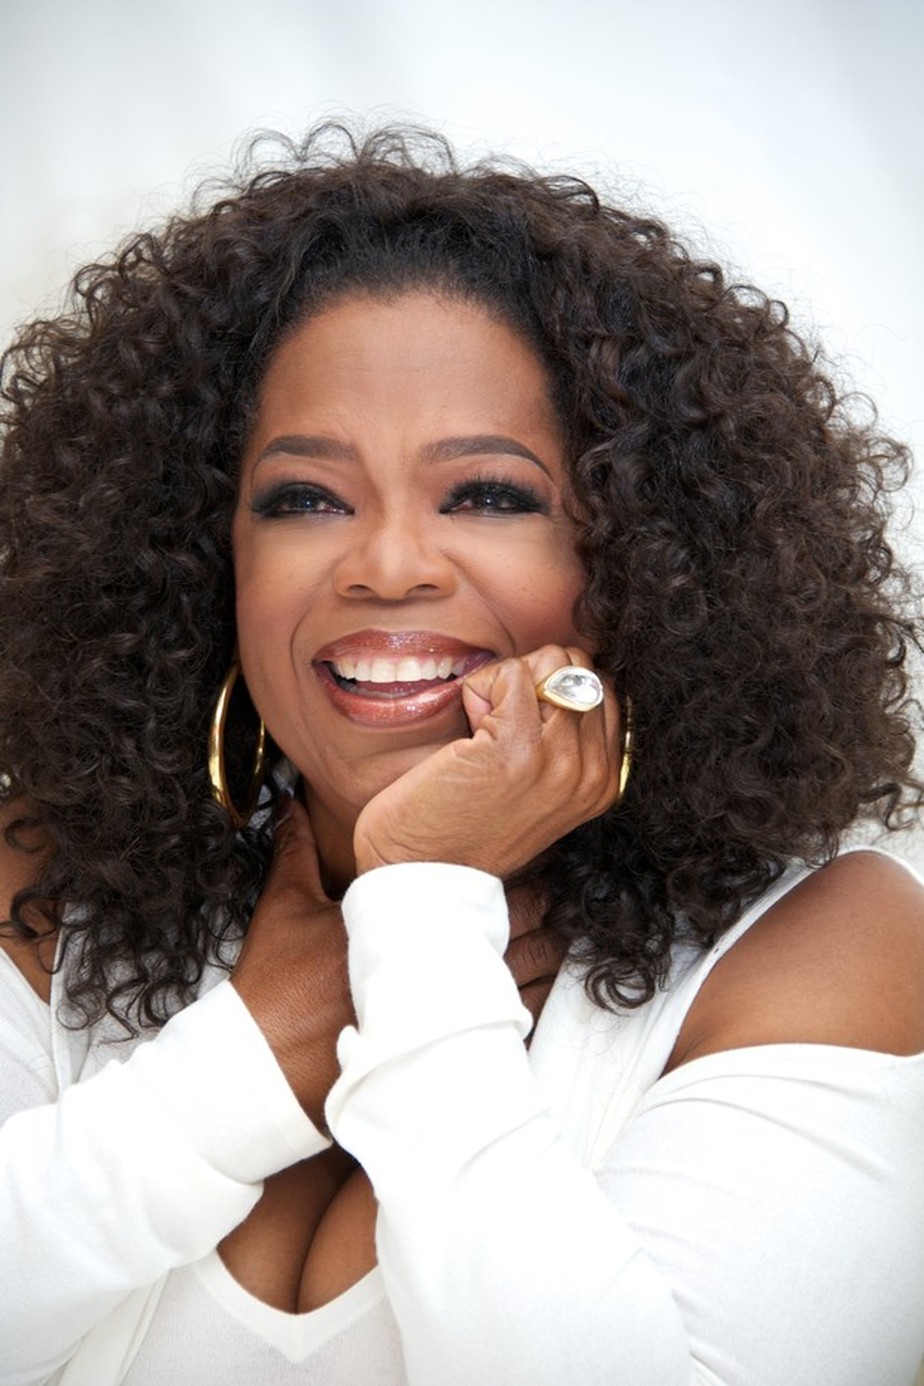 BEVERLY HILLS, CA - AUGUST 12:  Oprah Winfrey at the "Lee Daniels' The Butler" Press Conference at the Four Seasons Hotel on August 12, 2013 in Beverly Hills, California.  (Photo by Vera Anderson/WireImage) (Foto: WireImage)